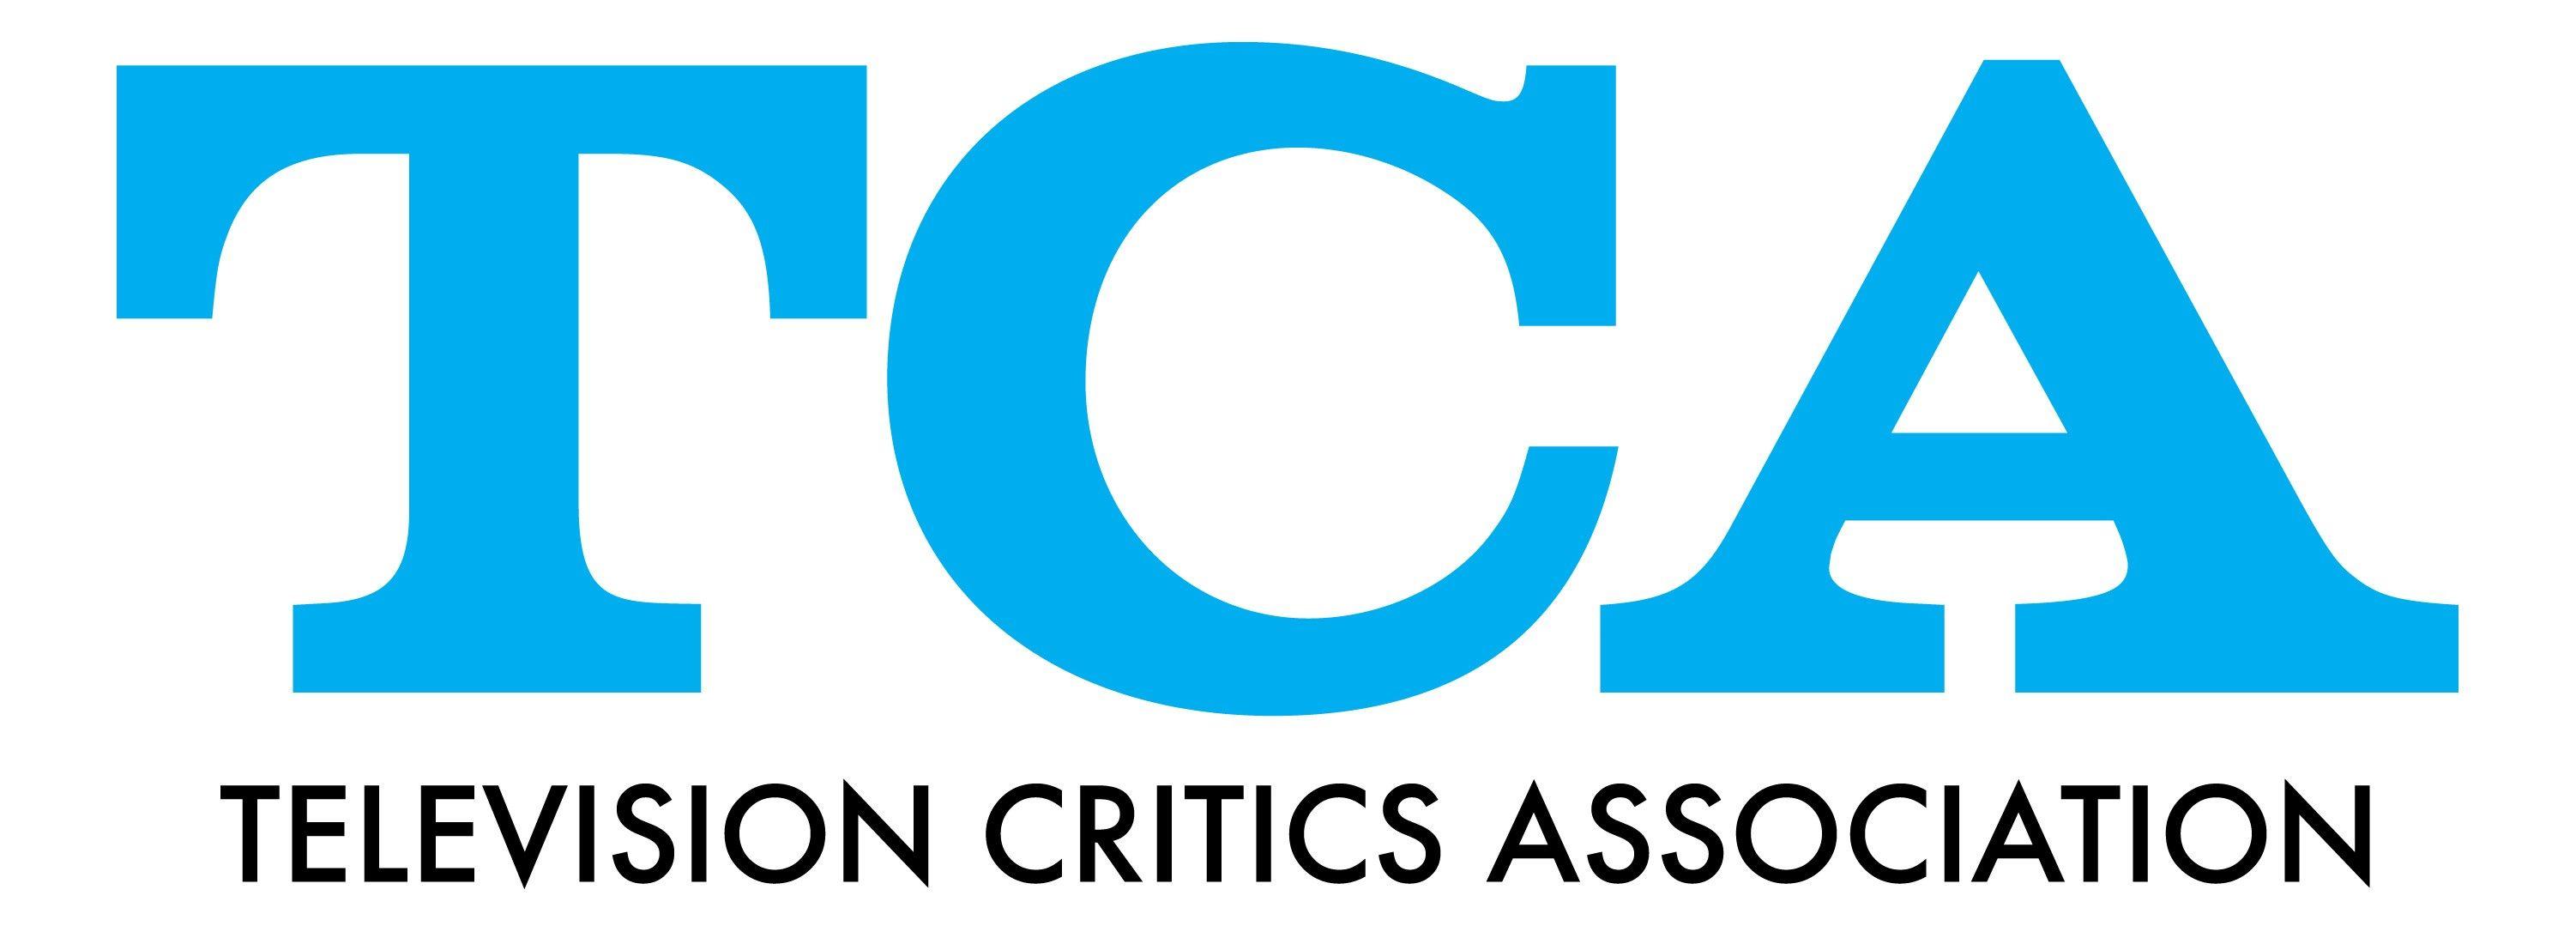 TCA Logo - PRESS TOUR: 2014 TCA Awards honor TV's best (updated with photo)